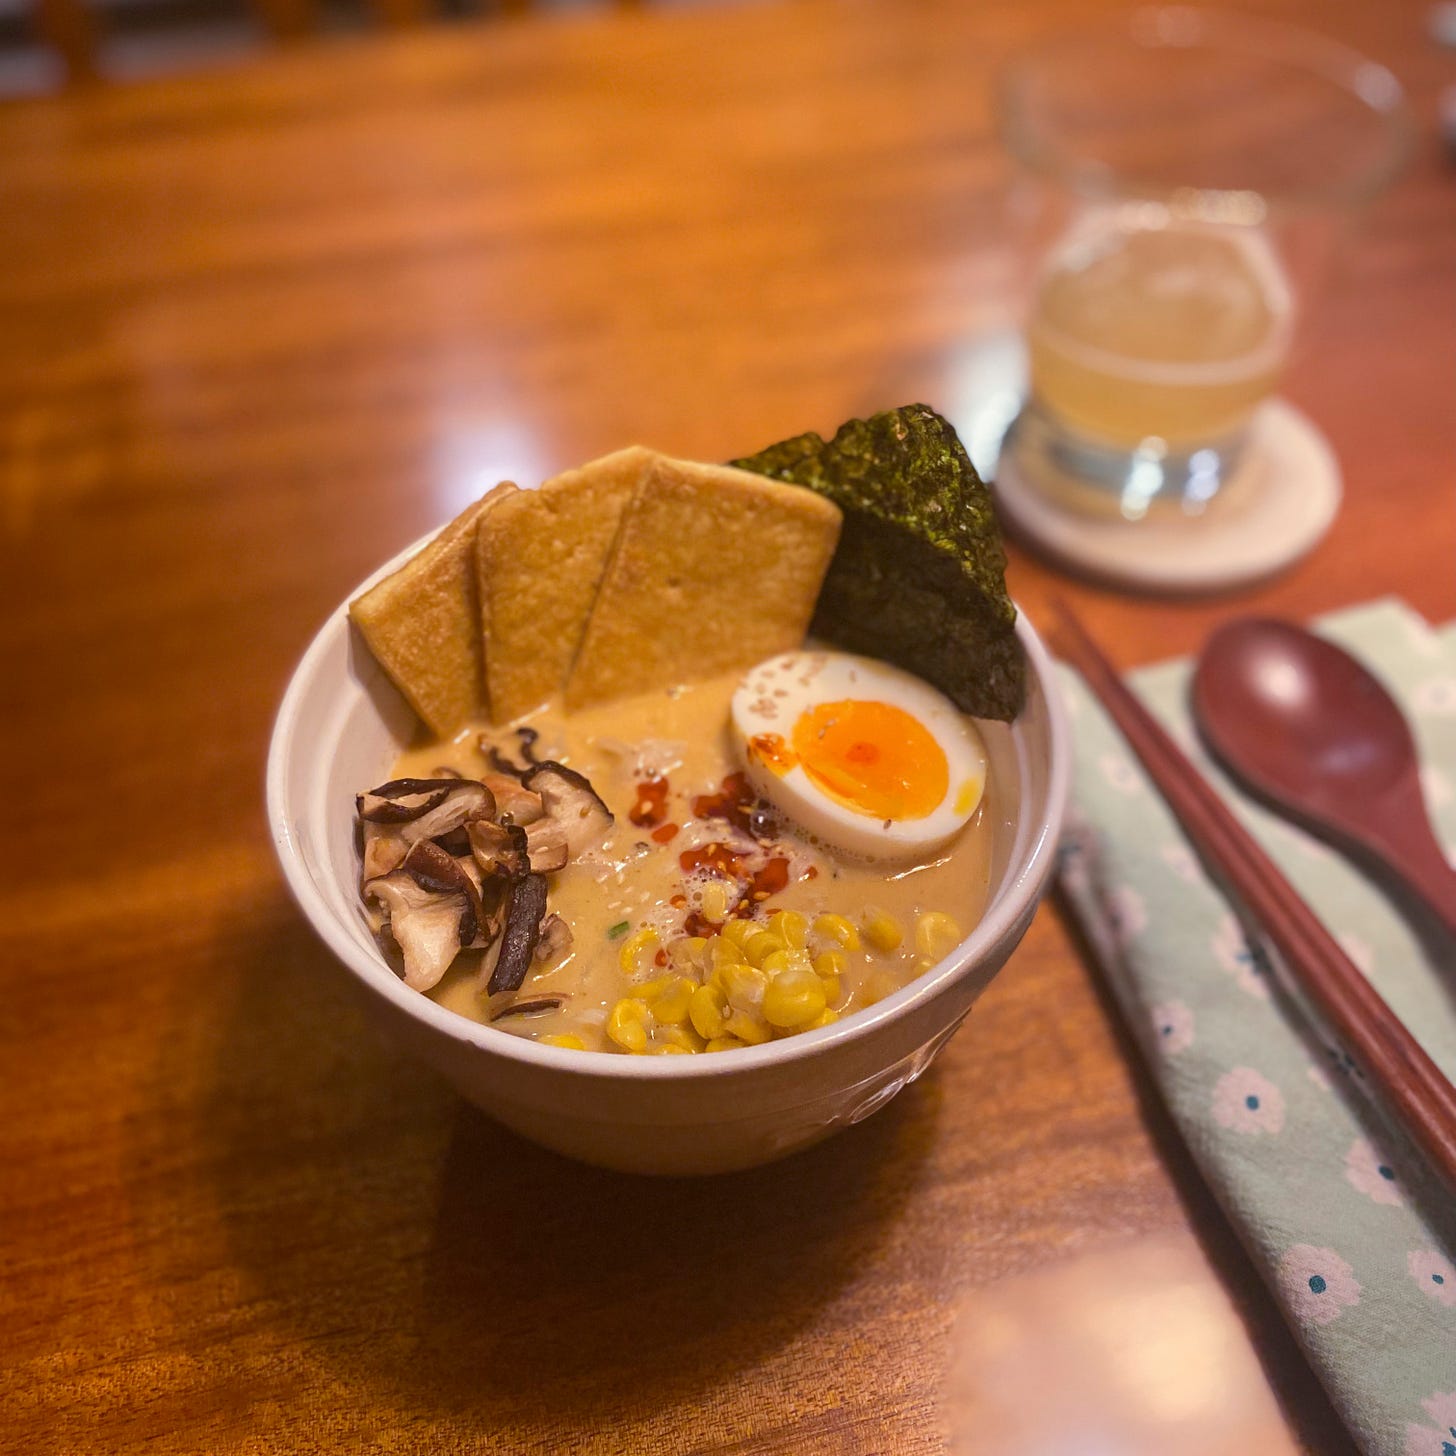 A white bowl of ramen with slices of fried tofu, shiitake mushrooms, corn, half a boiled egg, and a sheet of seaweed. Sesame seeds and chili oil are sprinkled on top. Next to it on a green flowered napkin are a set of wooden chopsticks and a matching spoon.